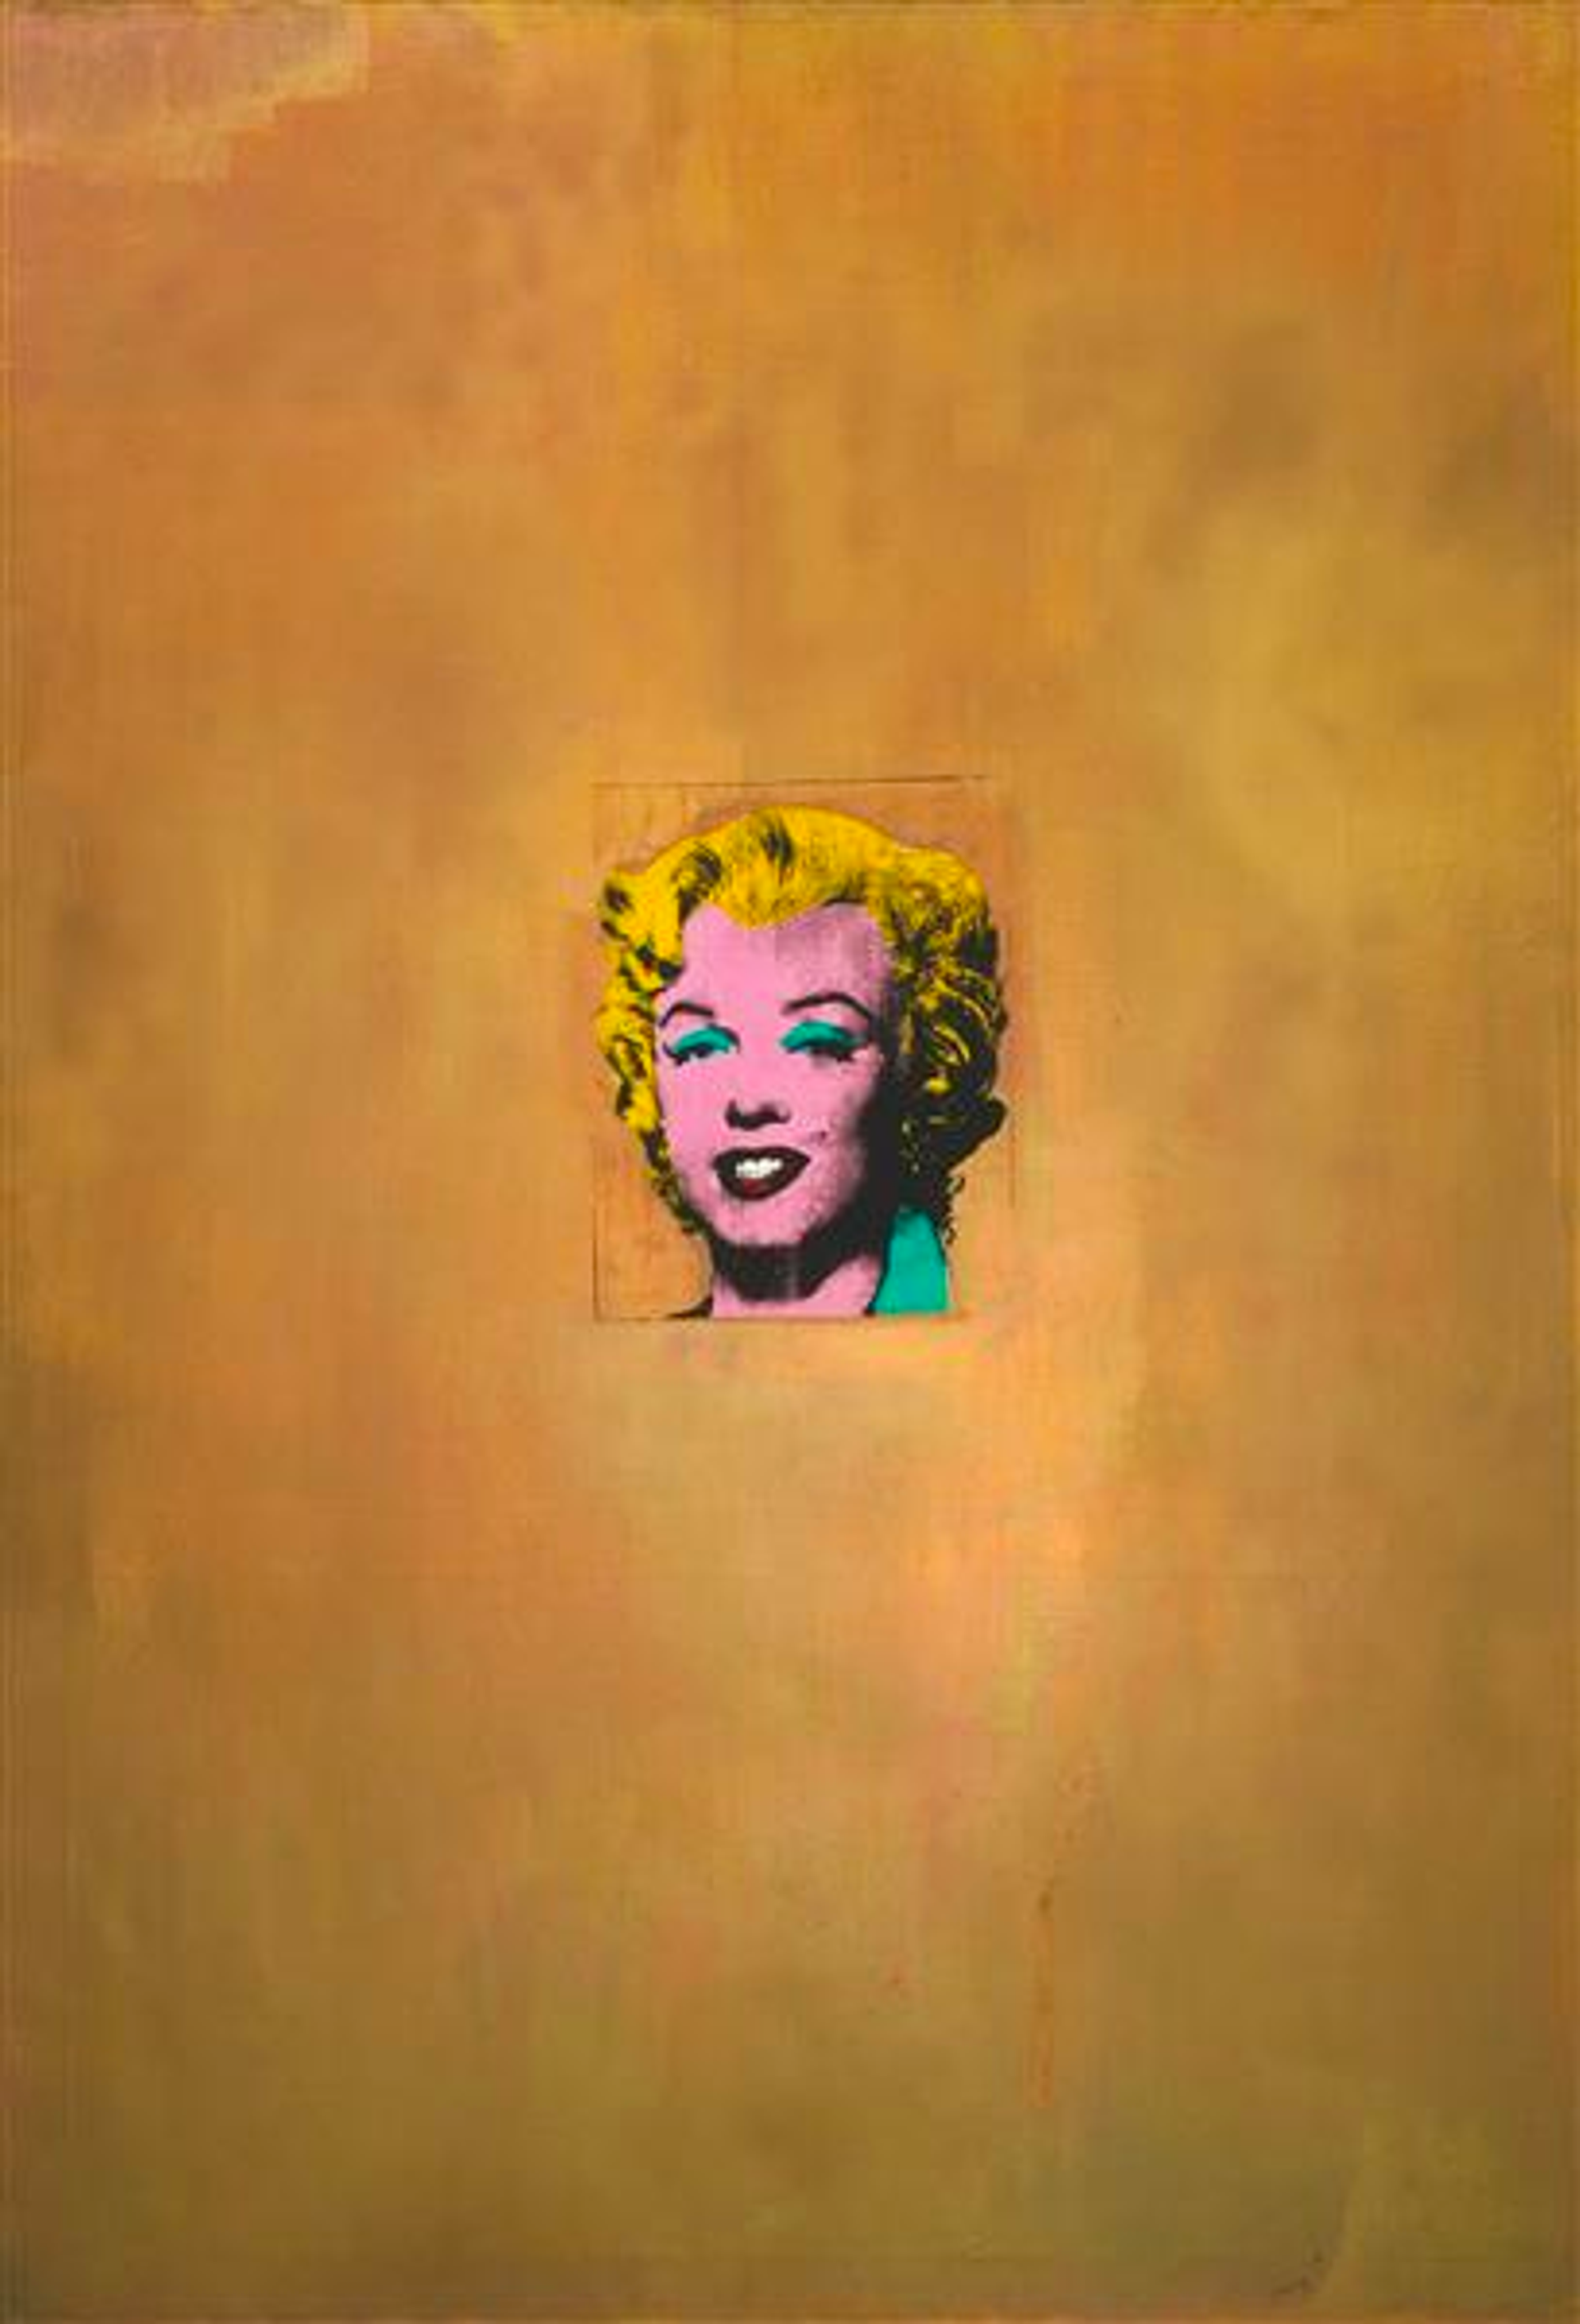 Andy Warhol's Marilyn: Value, Legacy & Authenticity